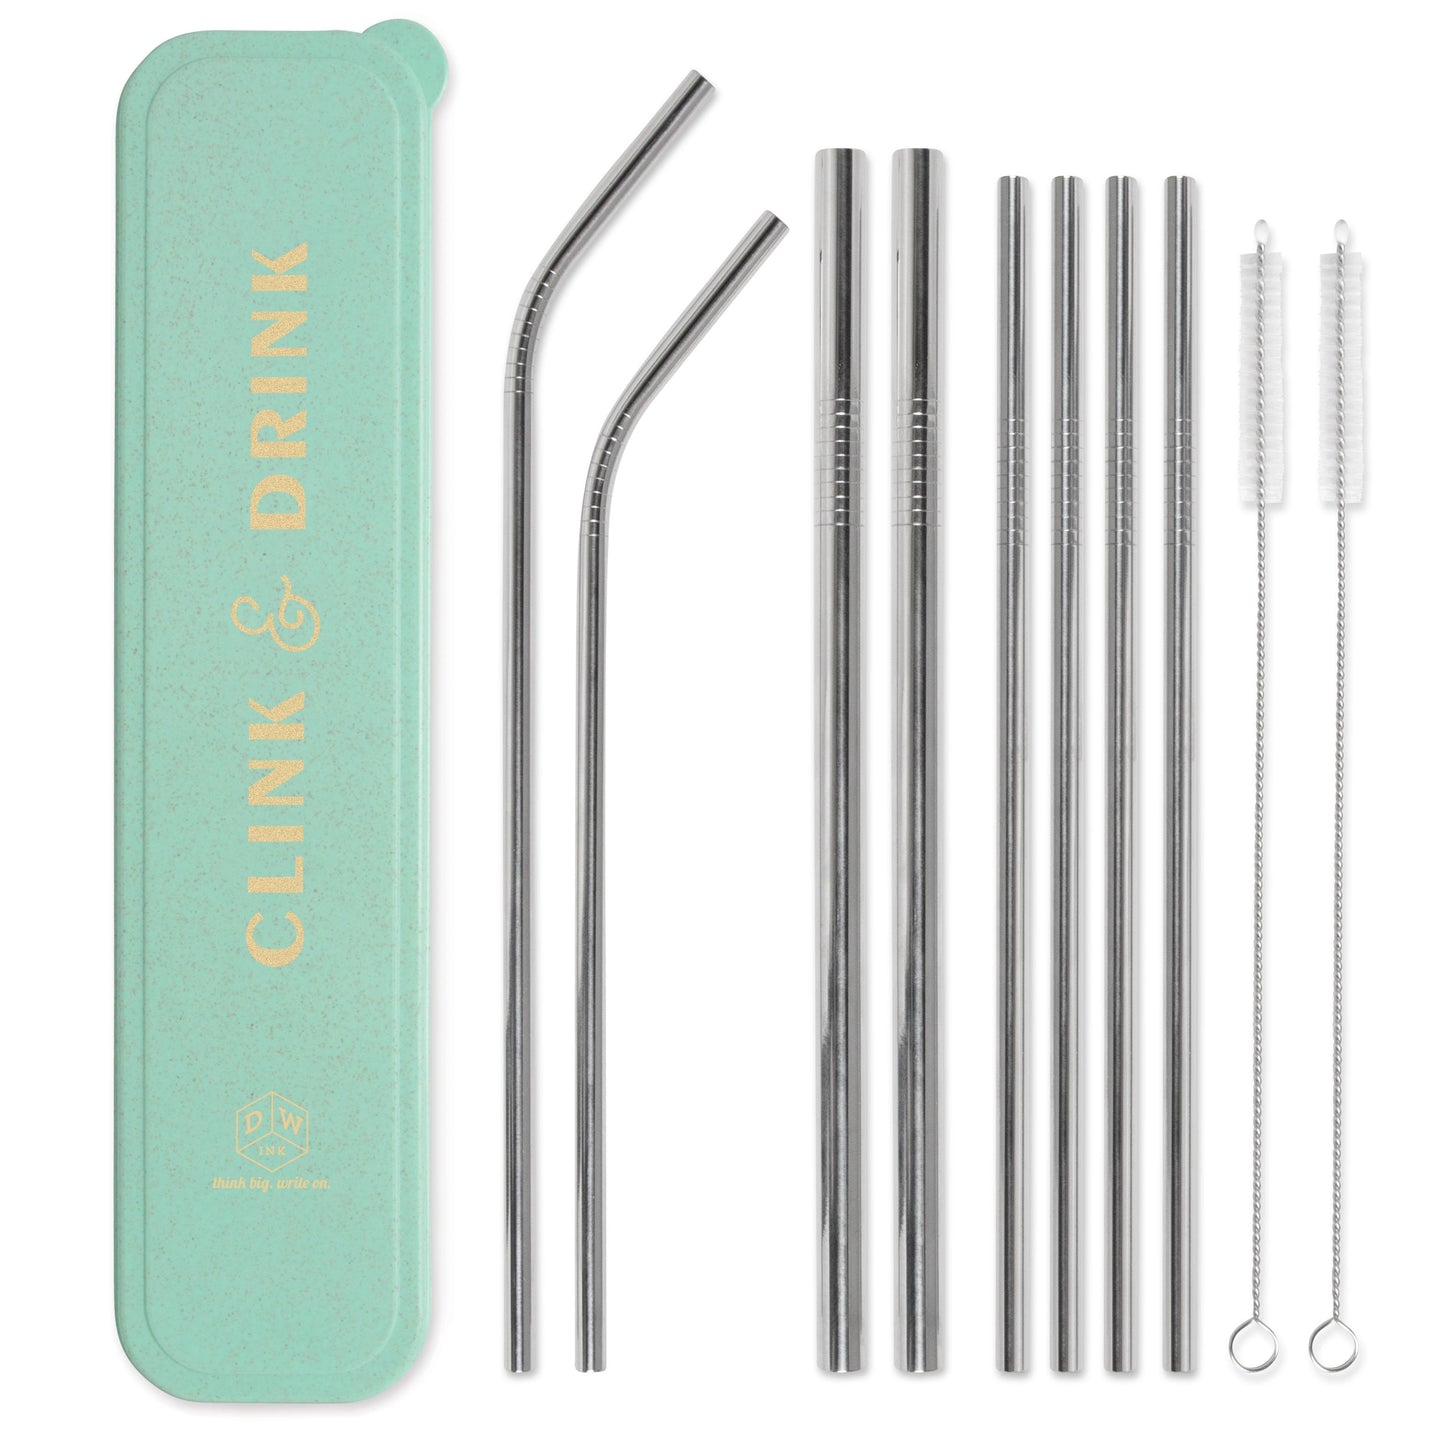 Stainless Steel Straw Set - "Clink & Drink"